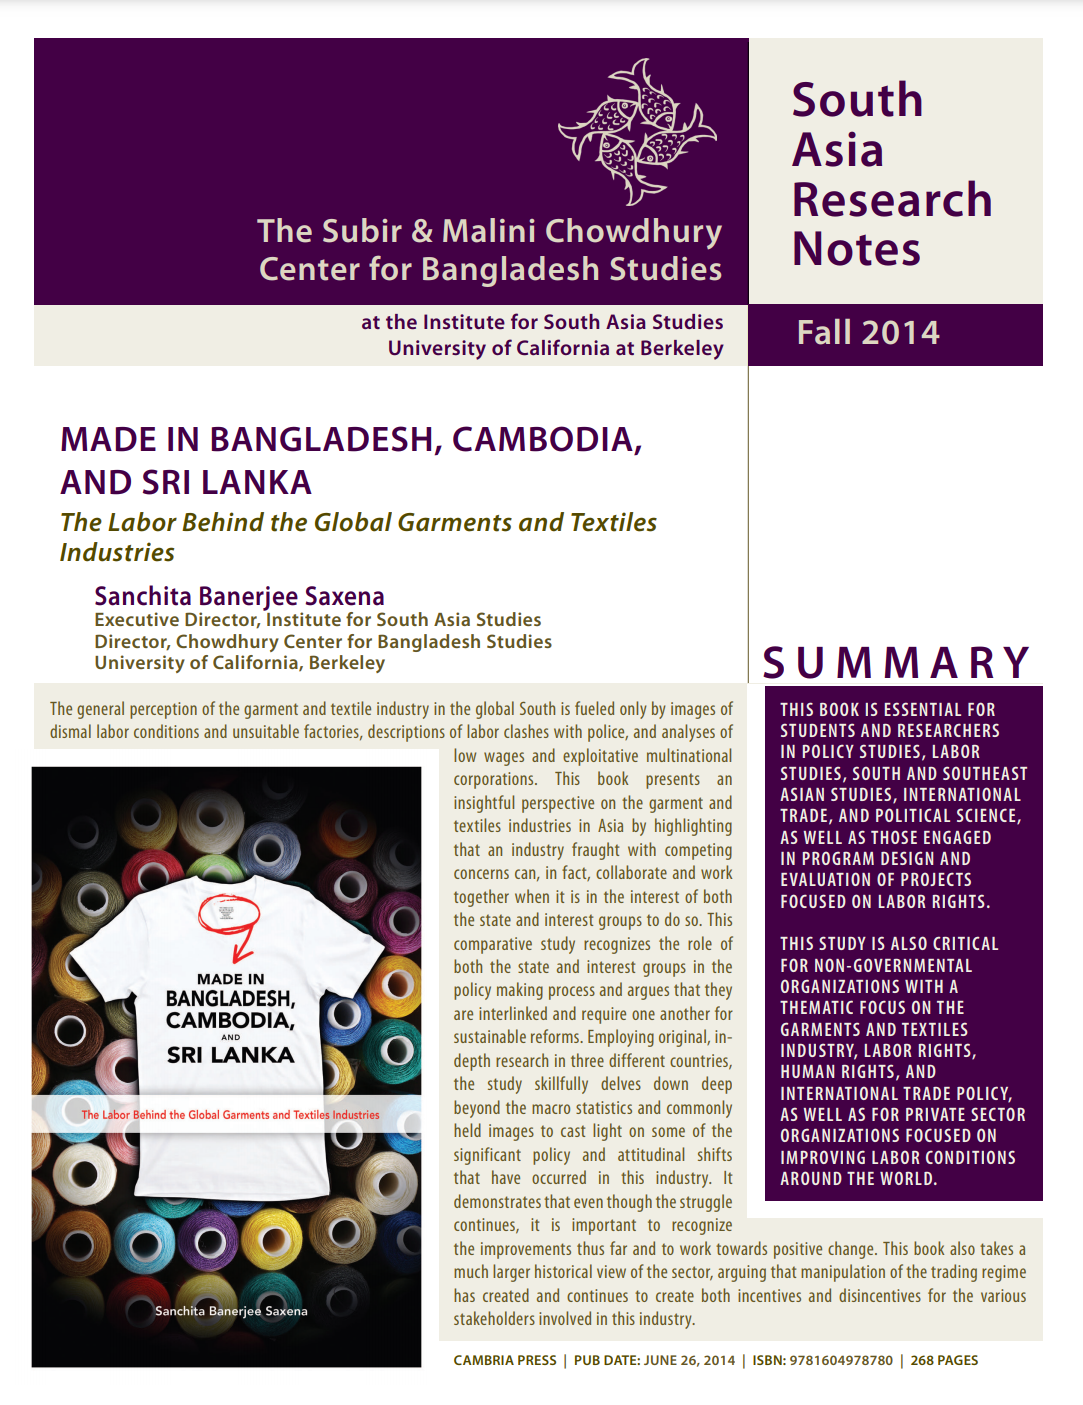 Cover image of SA Research Notes, Fall 2014 by Sanchita Saxena